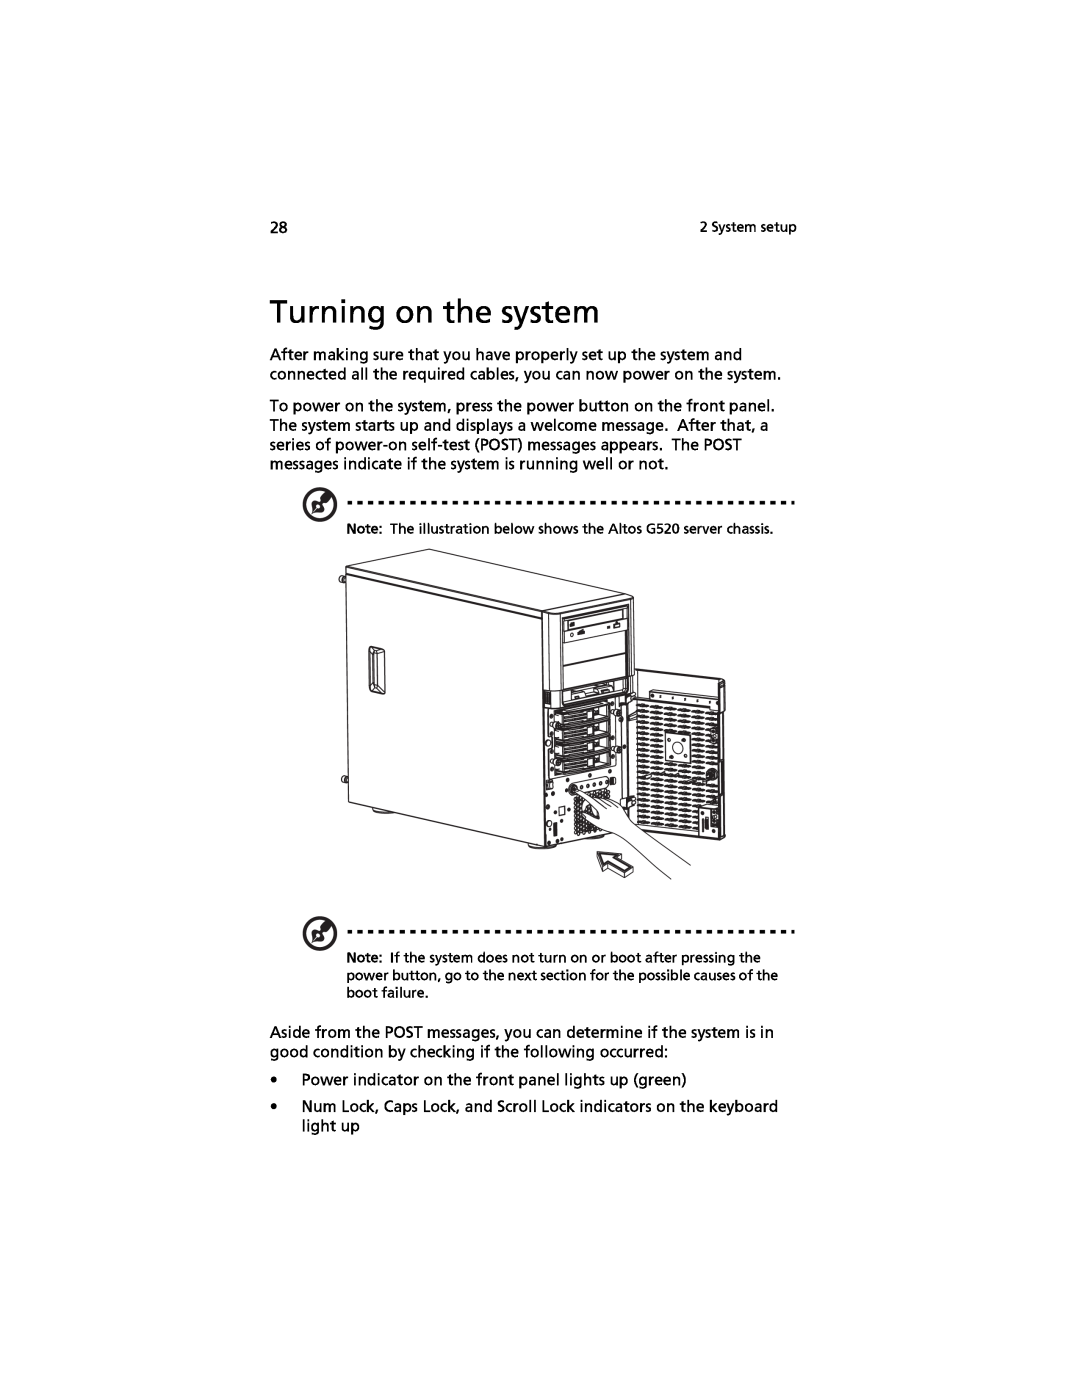 Acer G520 series manual Turning on the system 